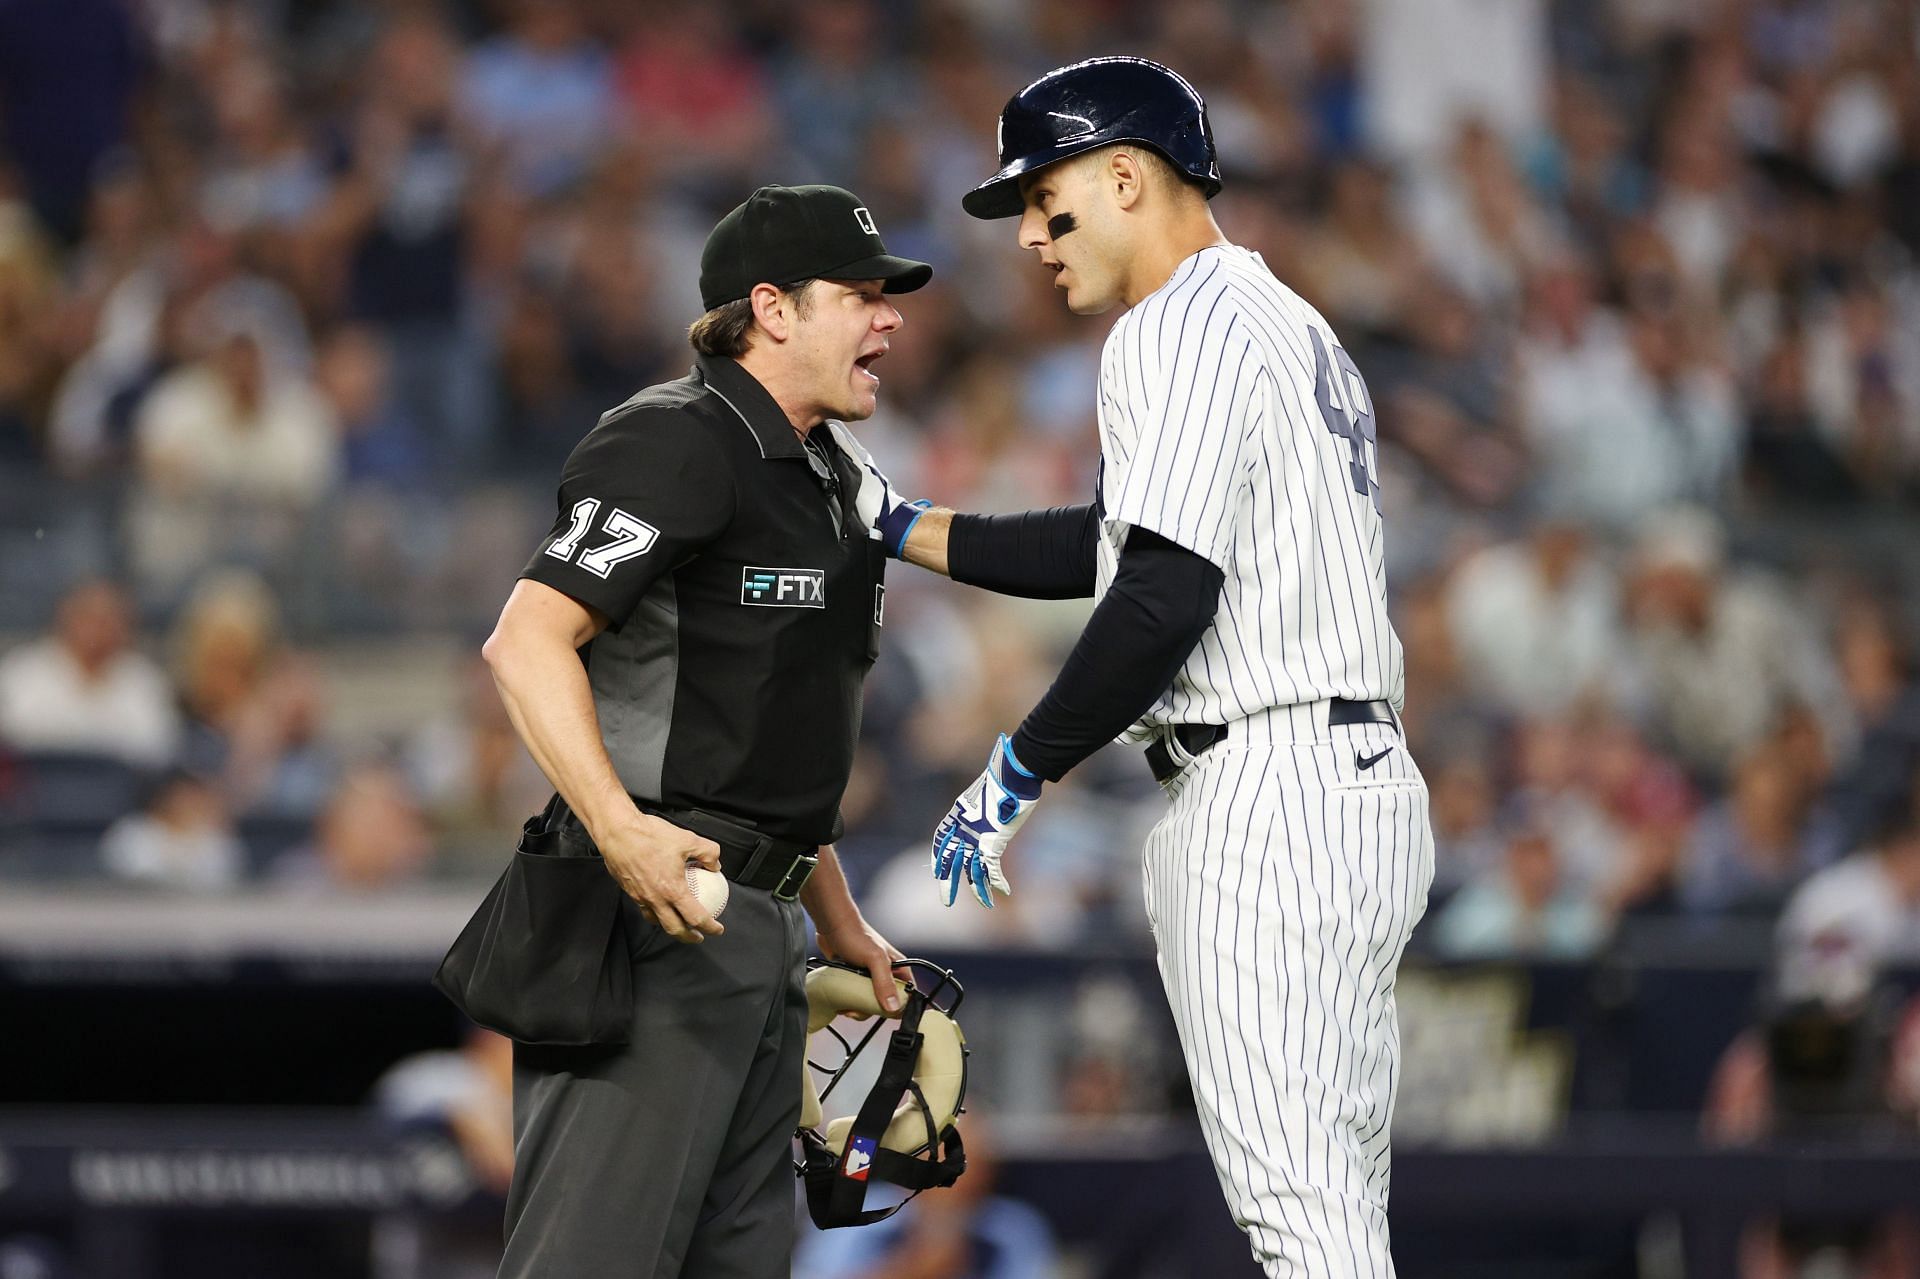 Yankees' Anthony Rizzo numbers down since return from back injury